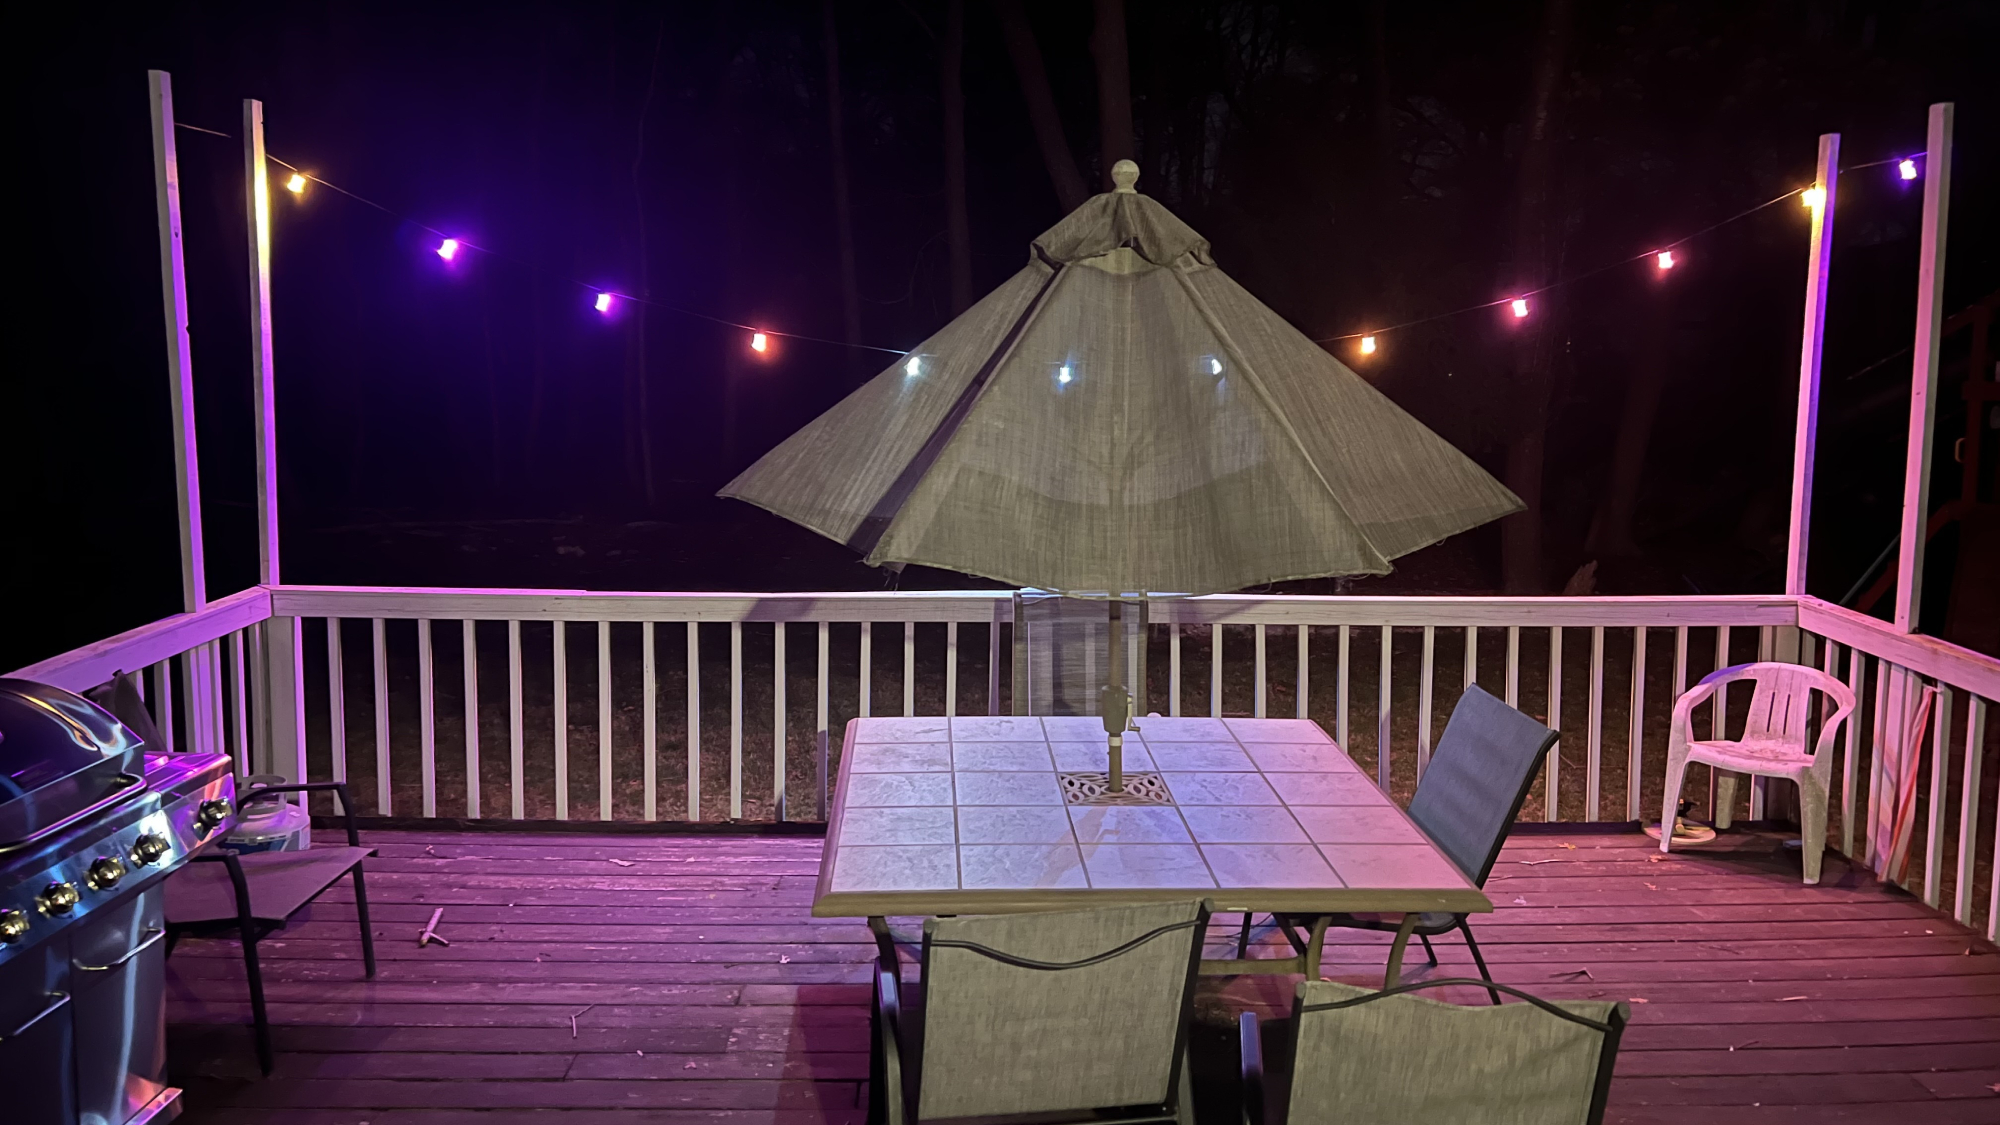 LIFX Outdoor String lights in backyard at night